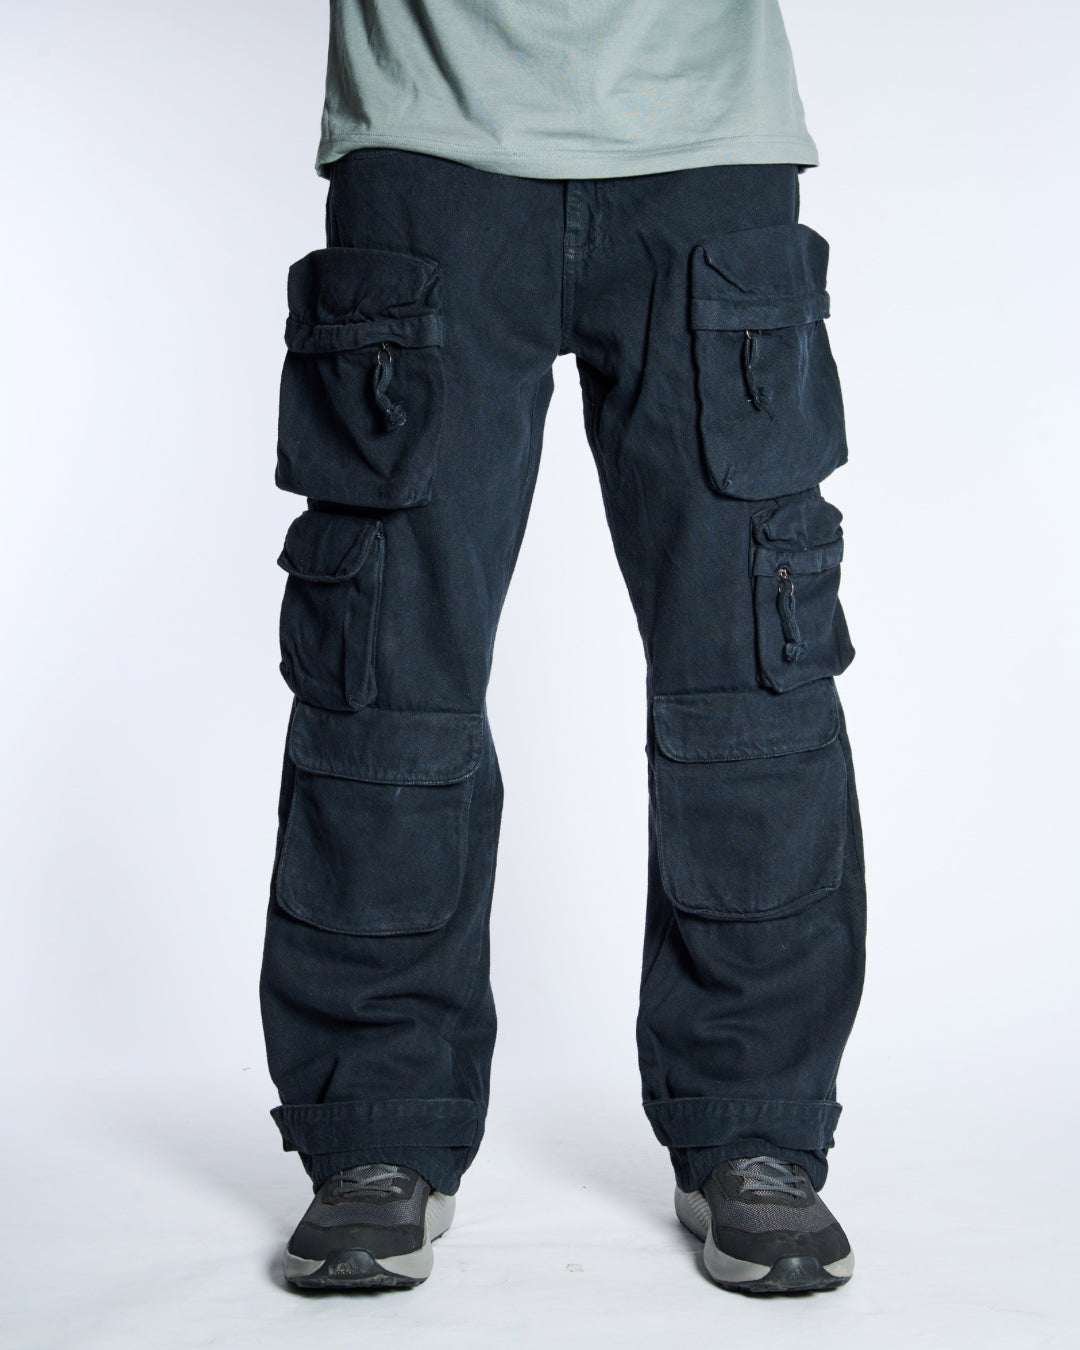 Black Utility Jeans With Pockets